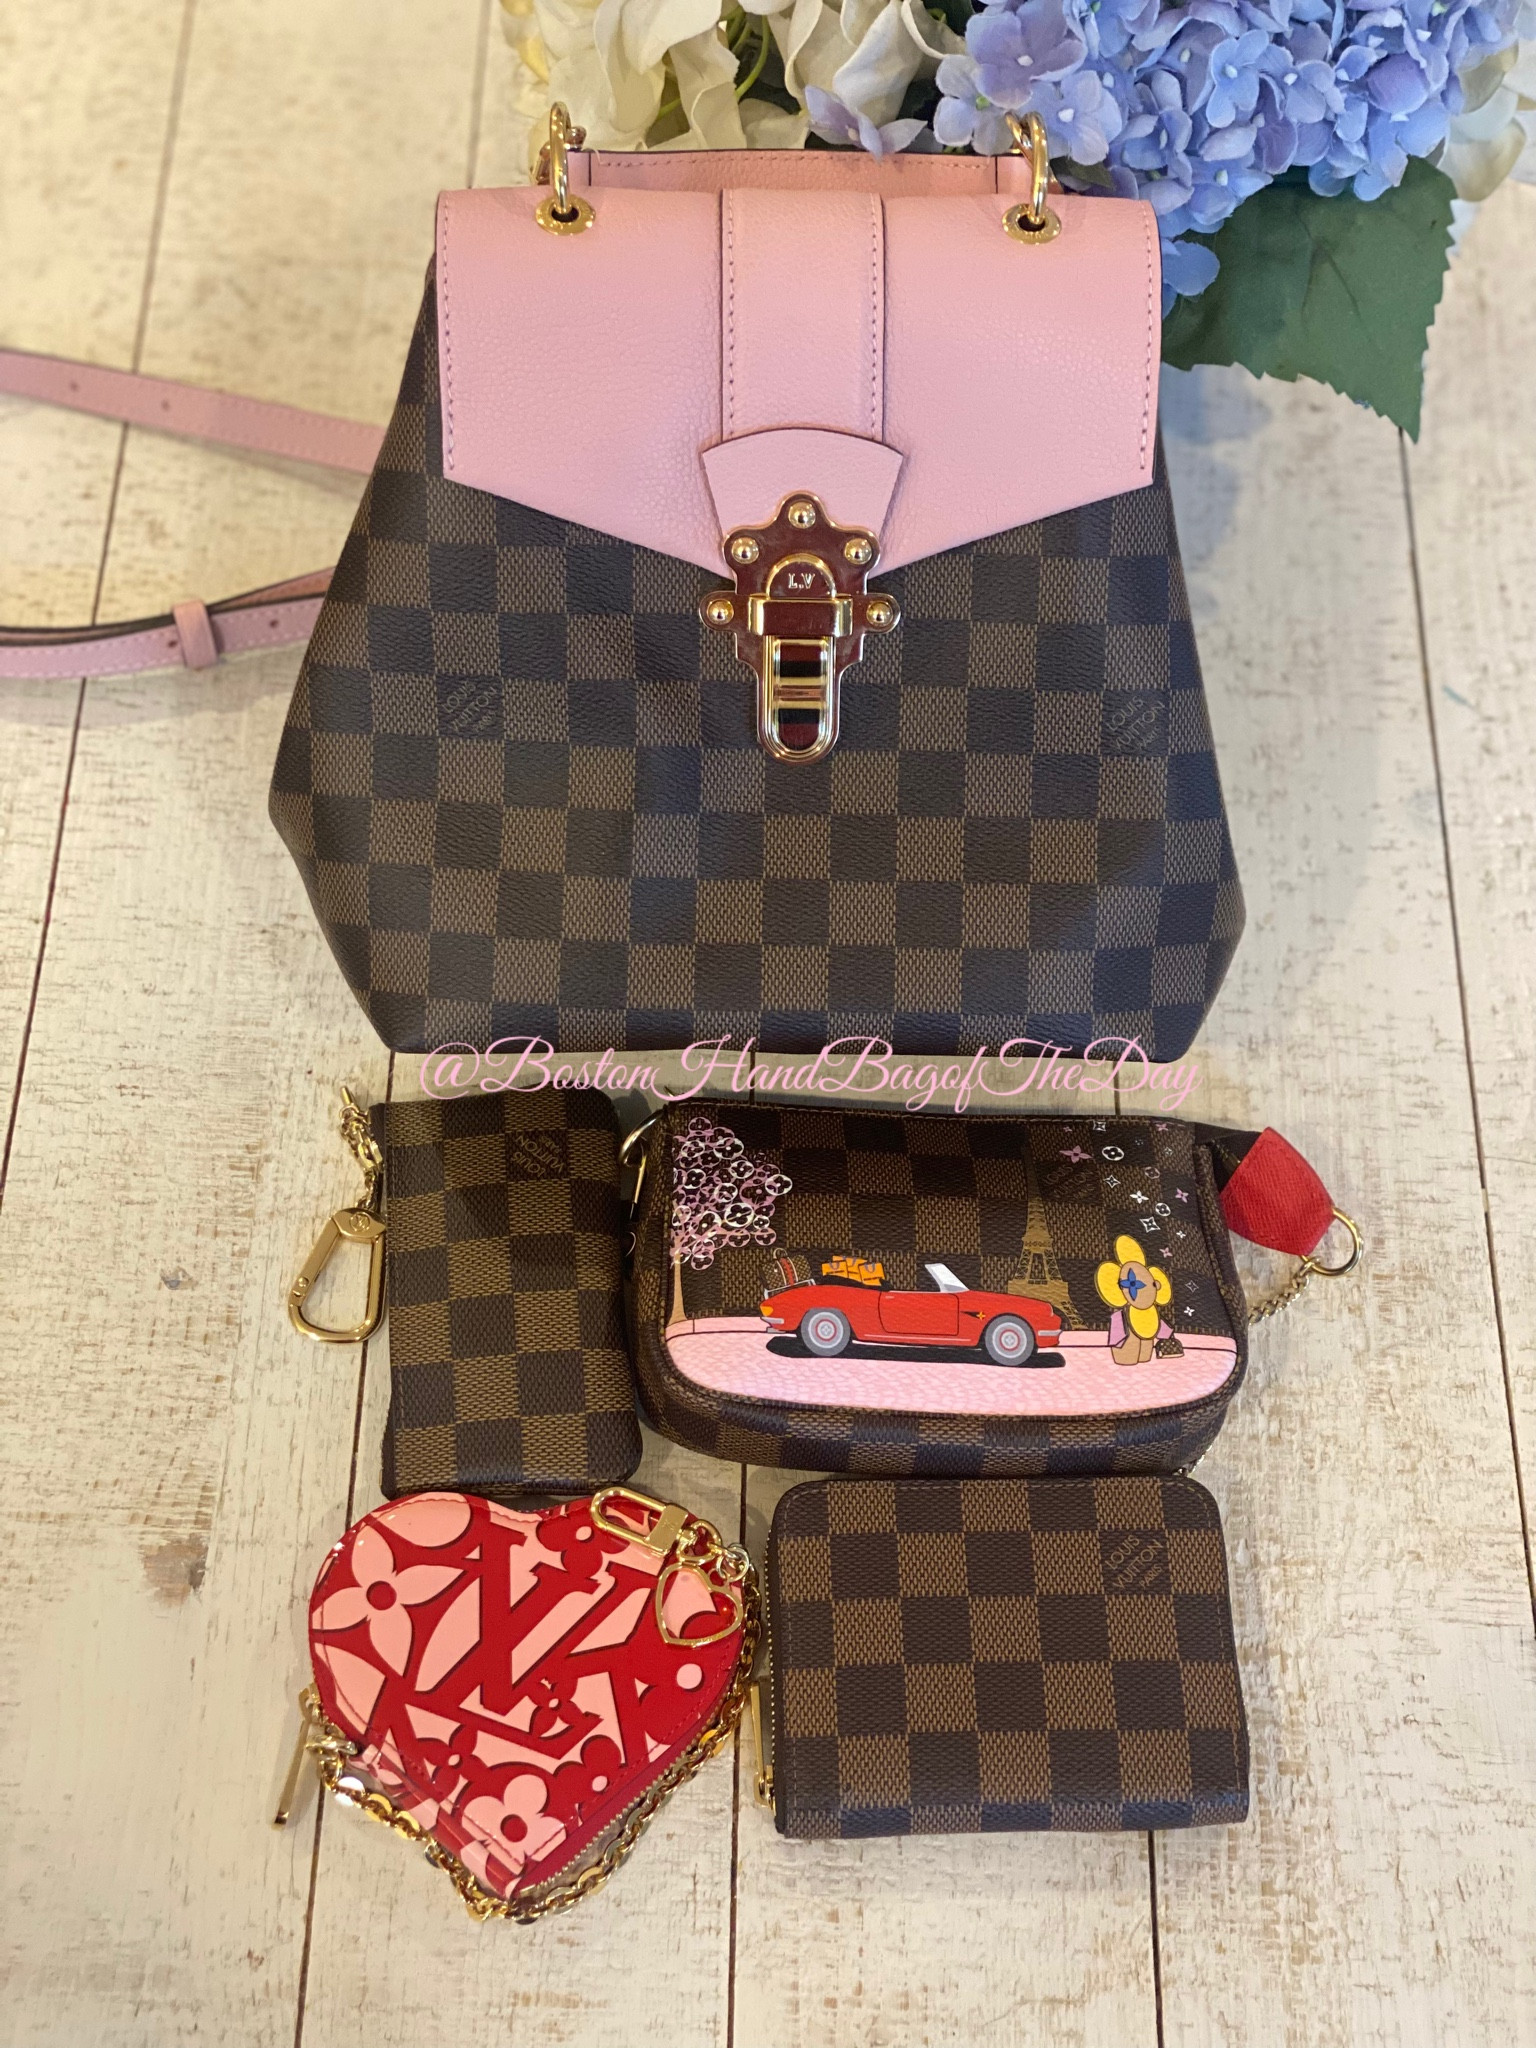 Louis Vuitton Damier Ebene Customized Hand Painted Butterfly